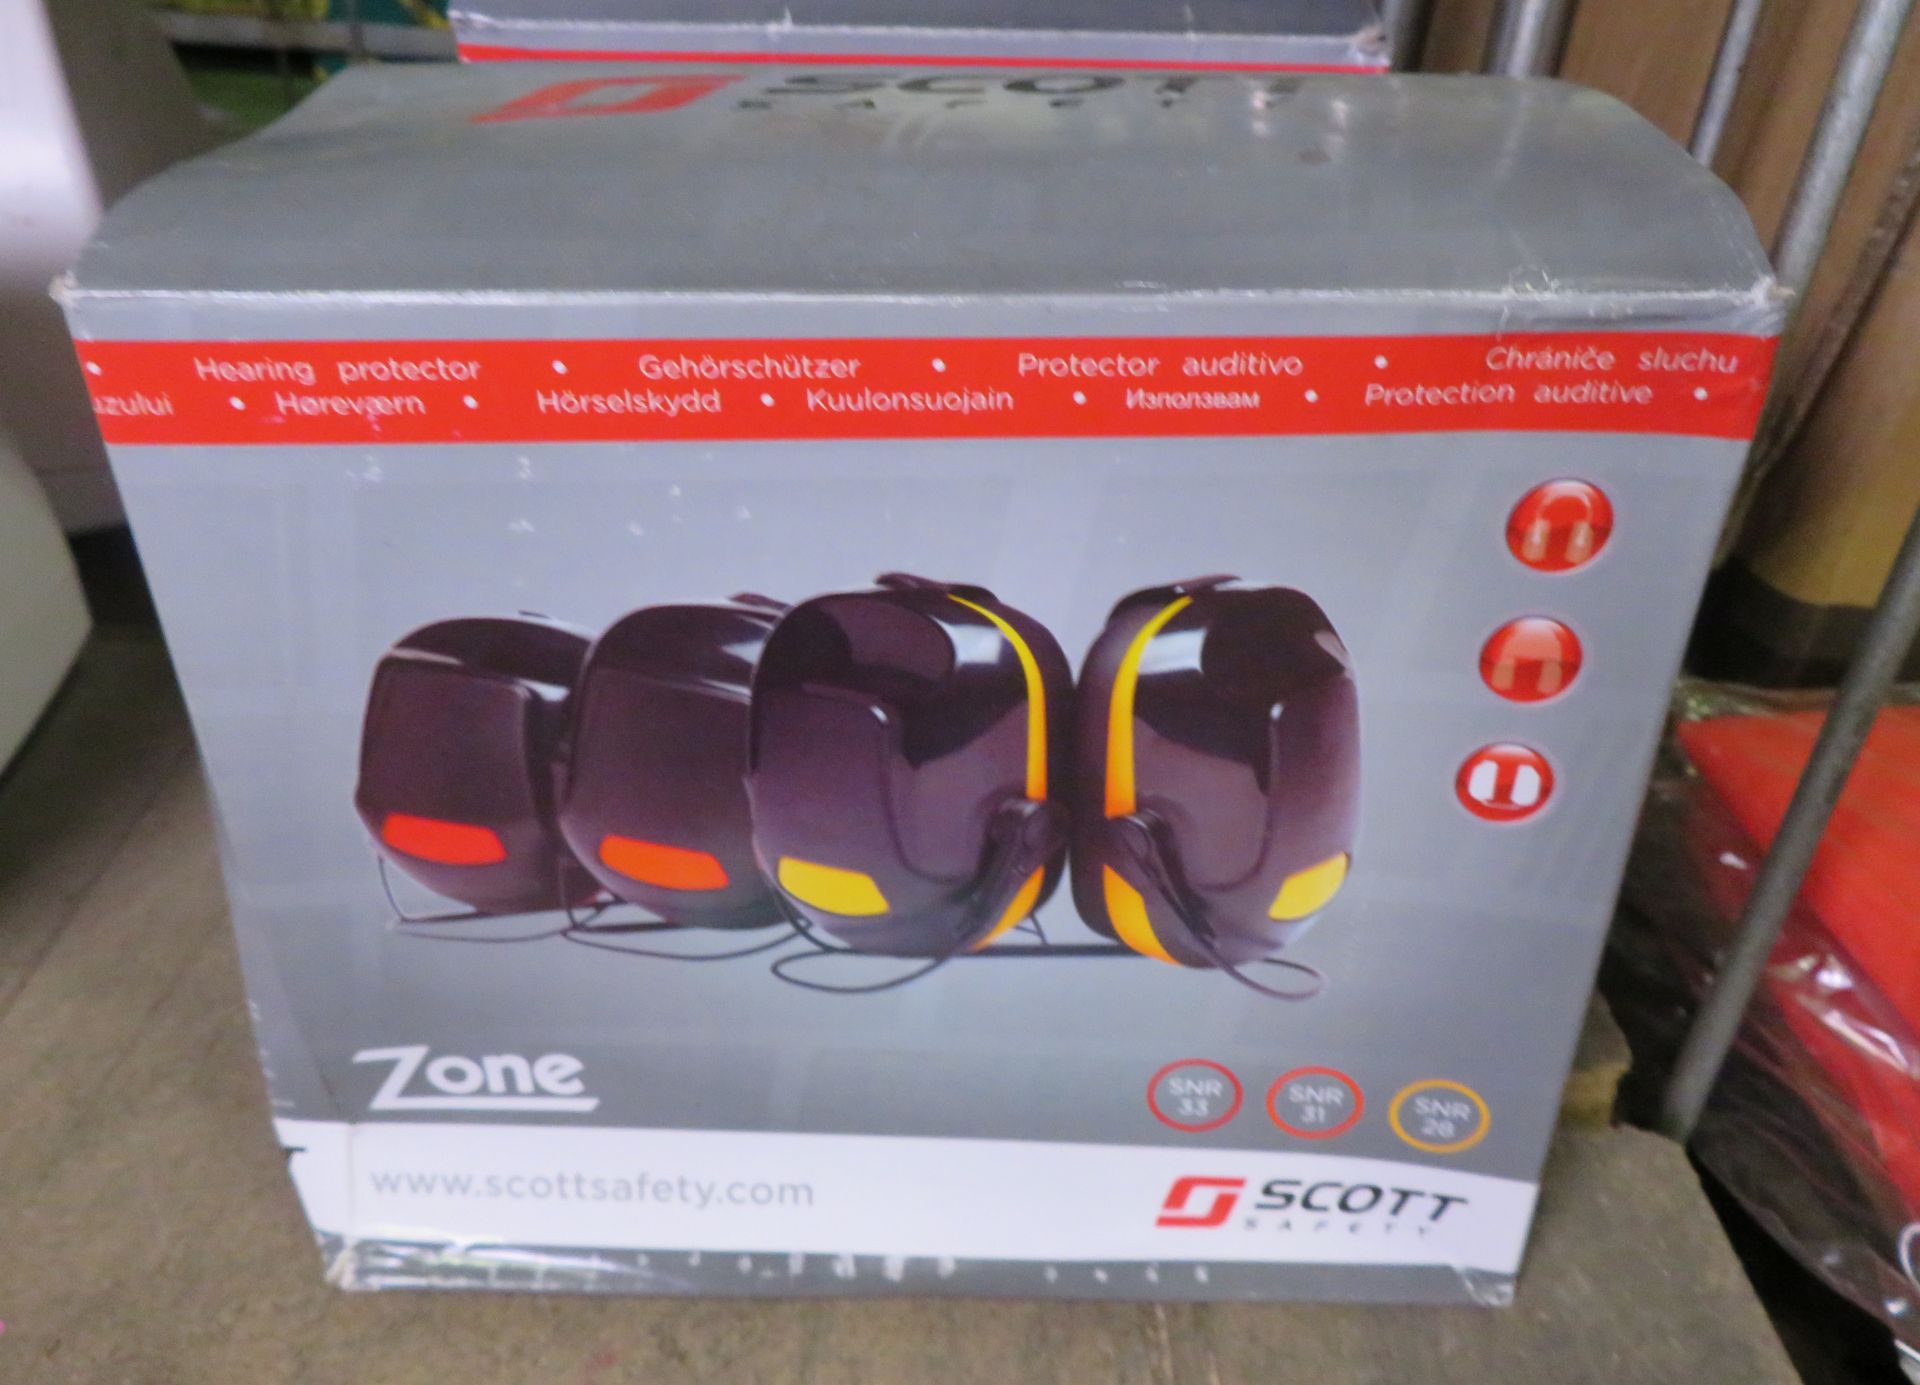 2x Scott safety zone ear defenders - Image 2 of 2